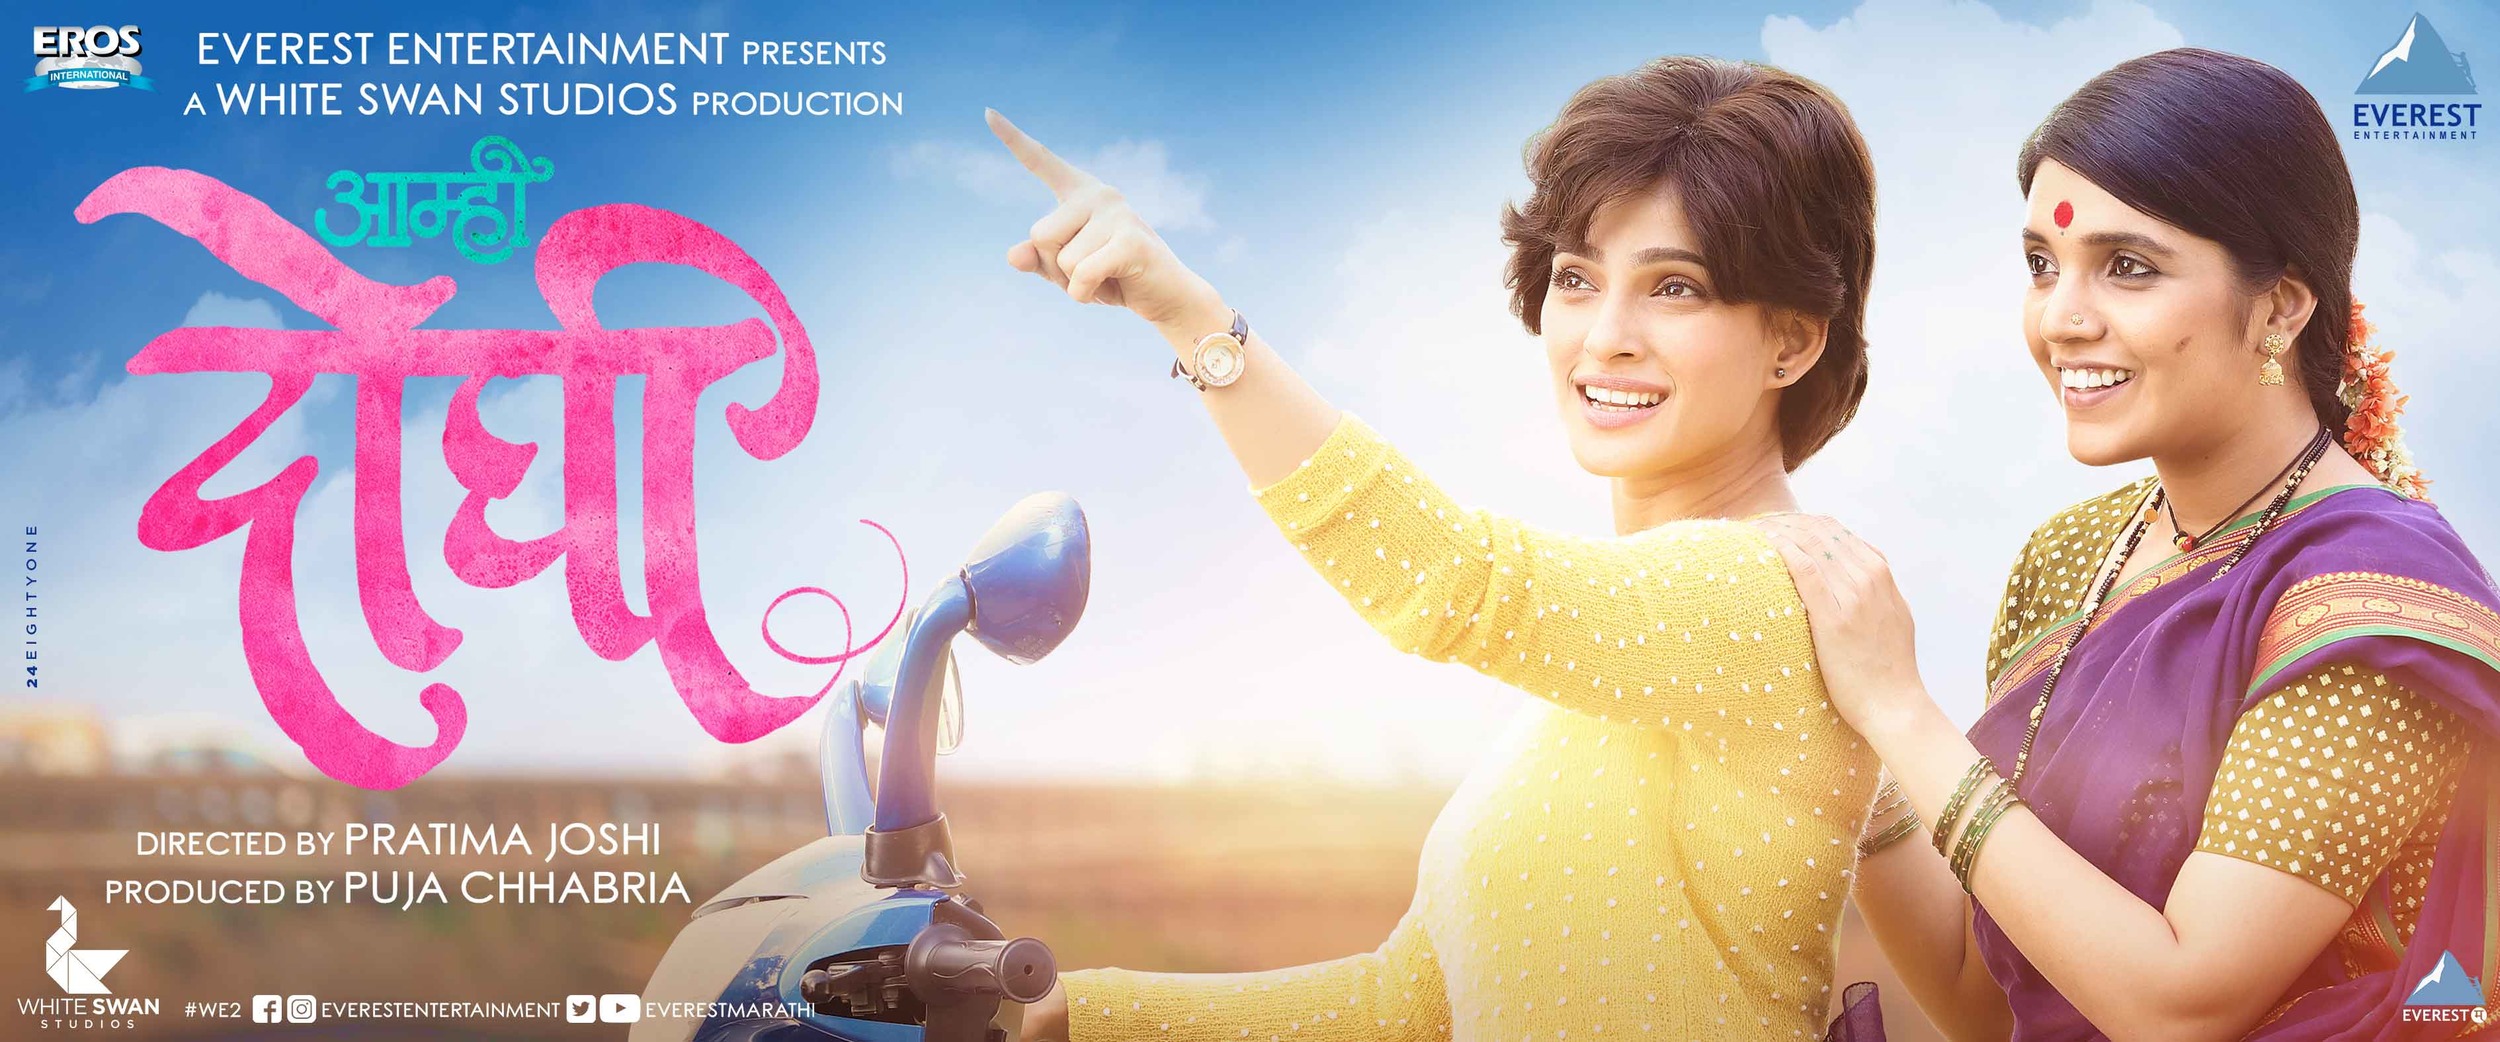 Mega Sized Movie Poster Image for Aamhi Doghi (#6 of 18)